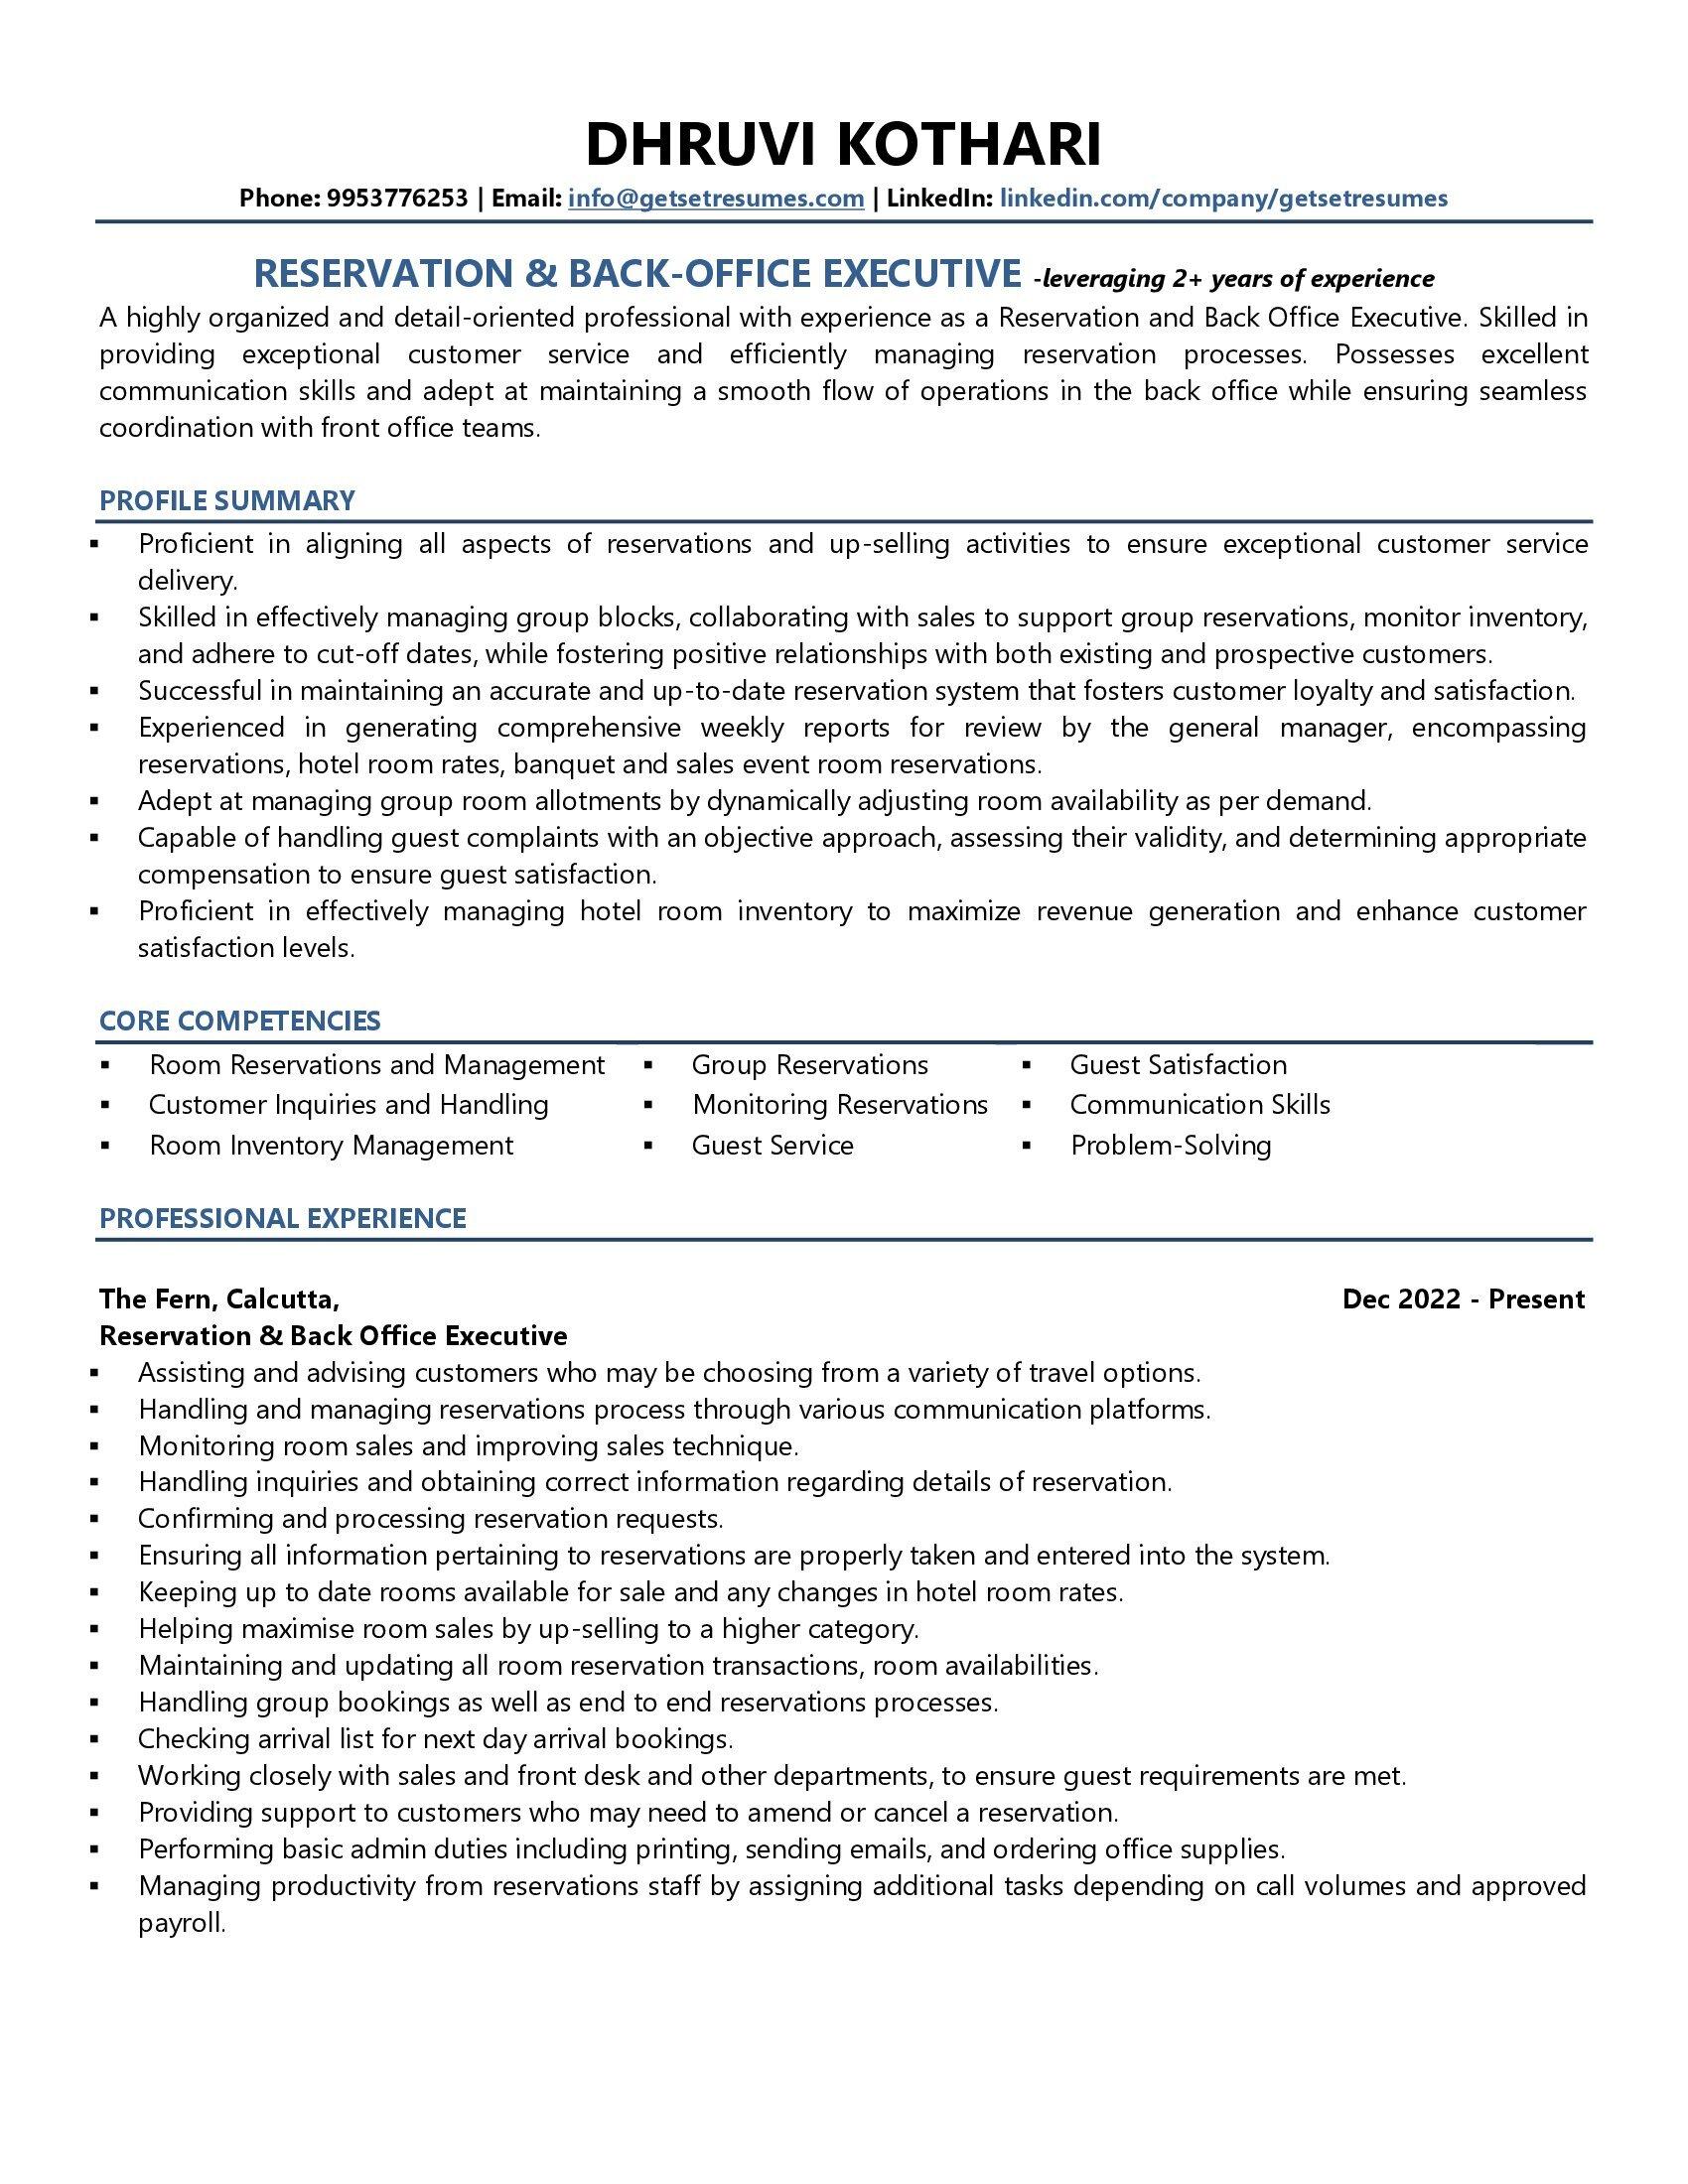 Reservation & Backoffice Executive - Resume Example & Template